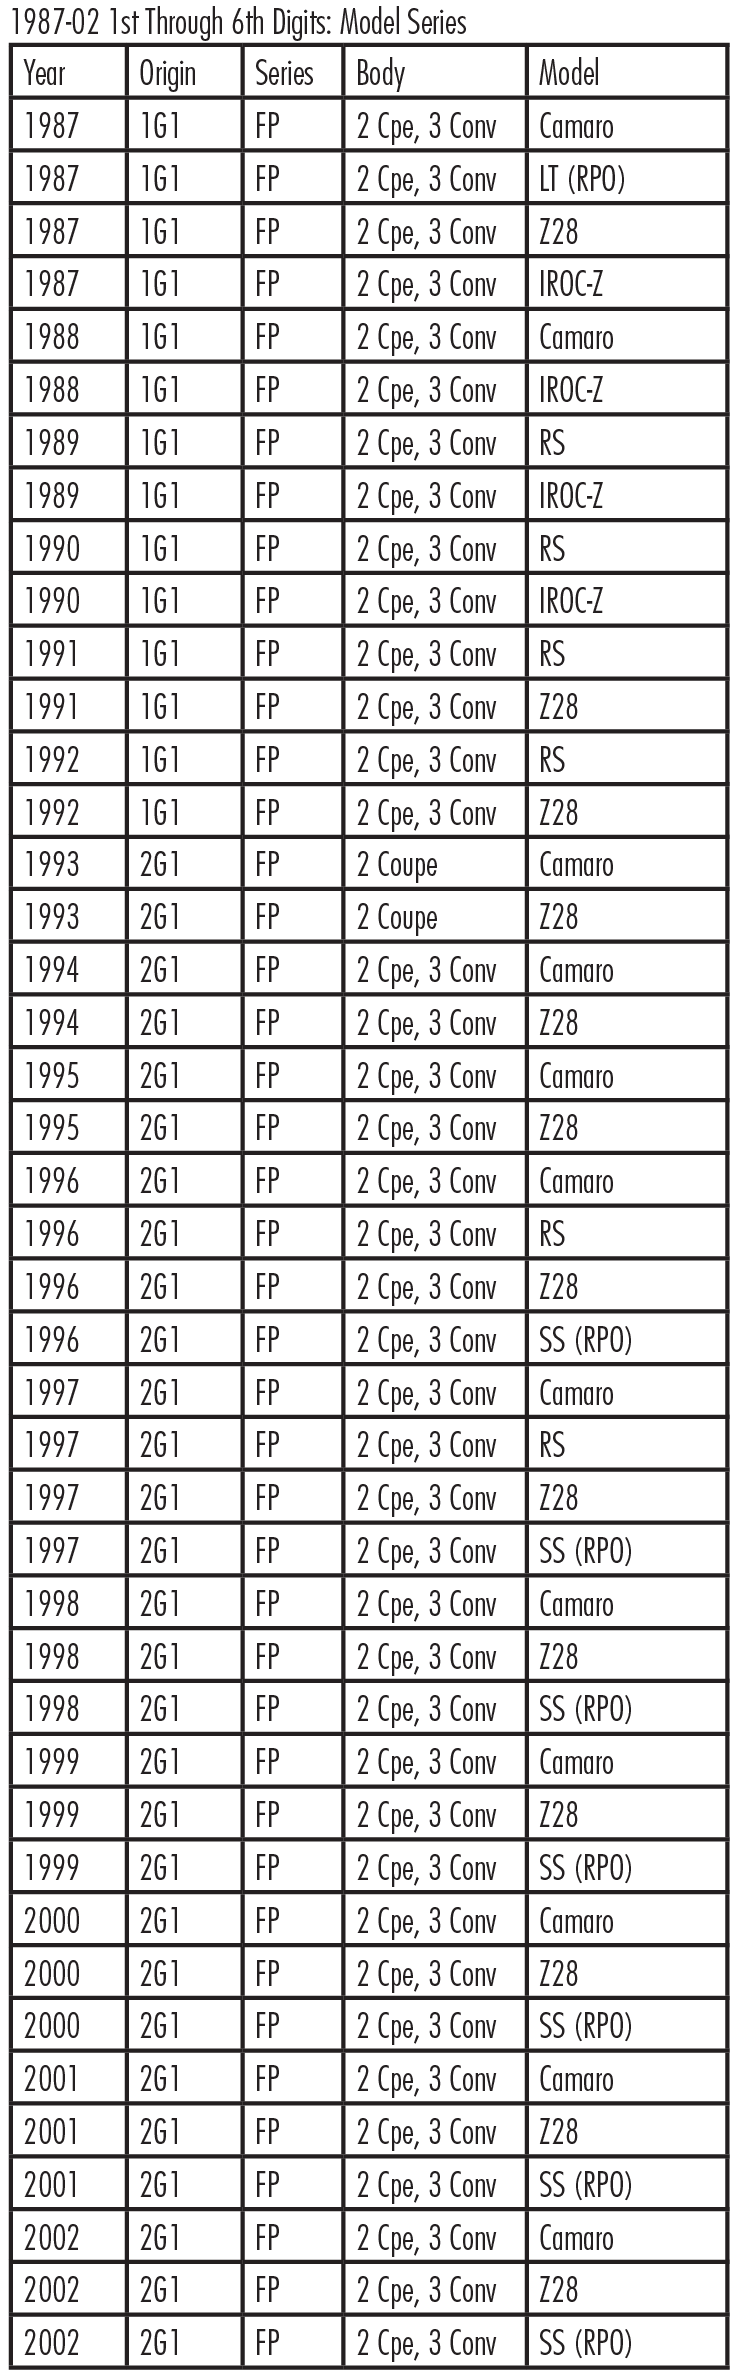 1987-02 VIN 1st to 6th digits